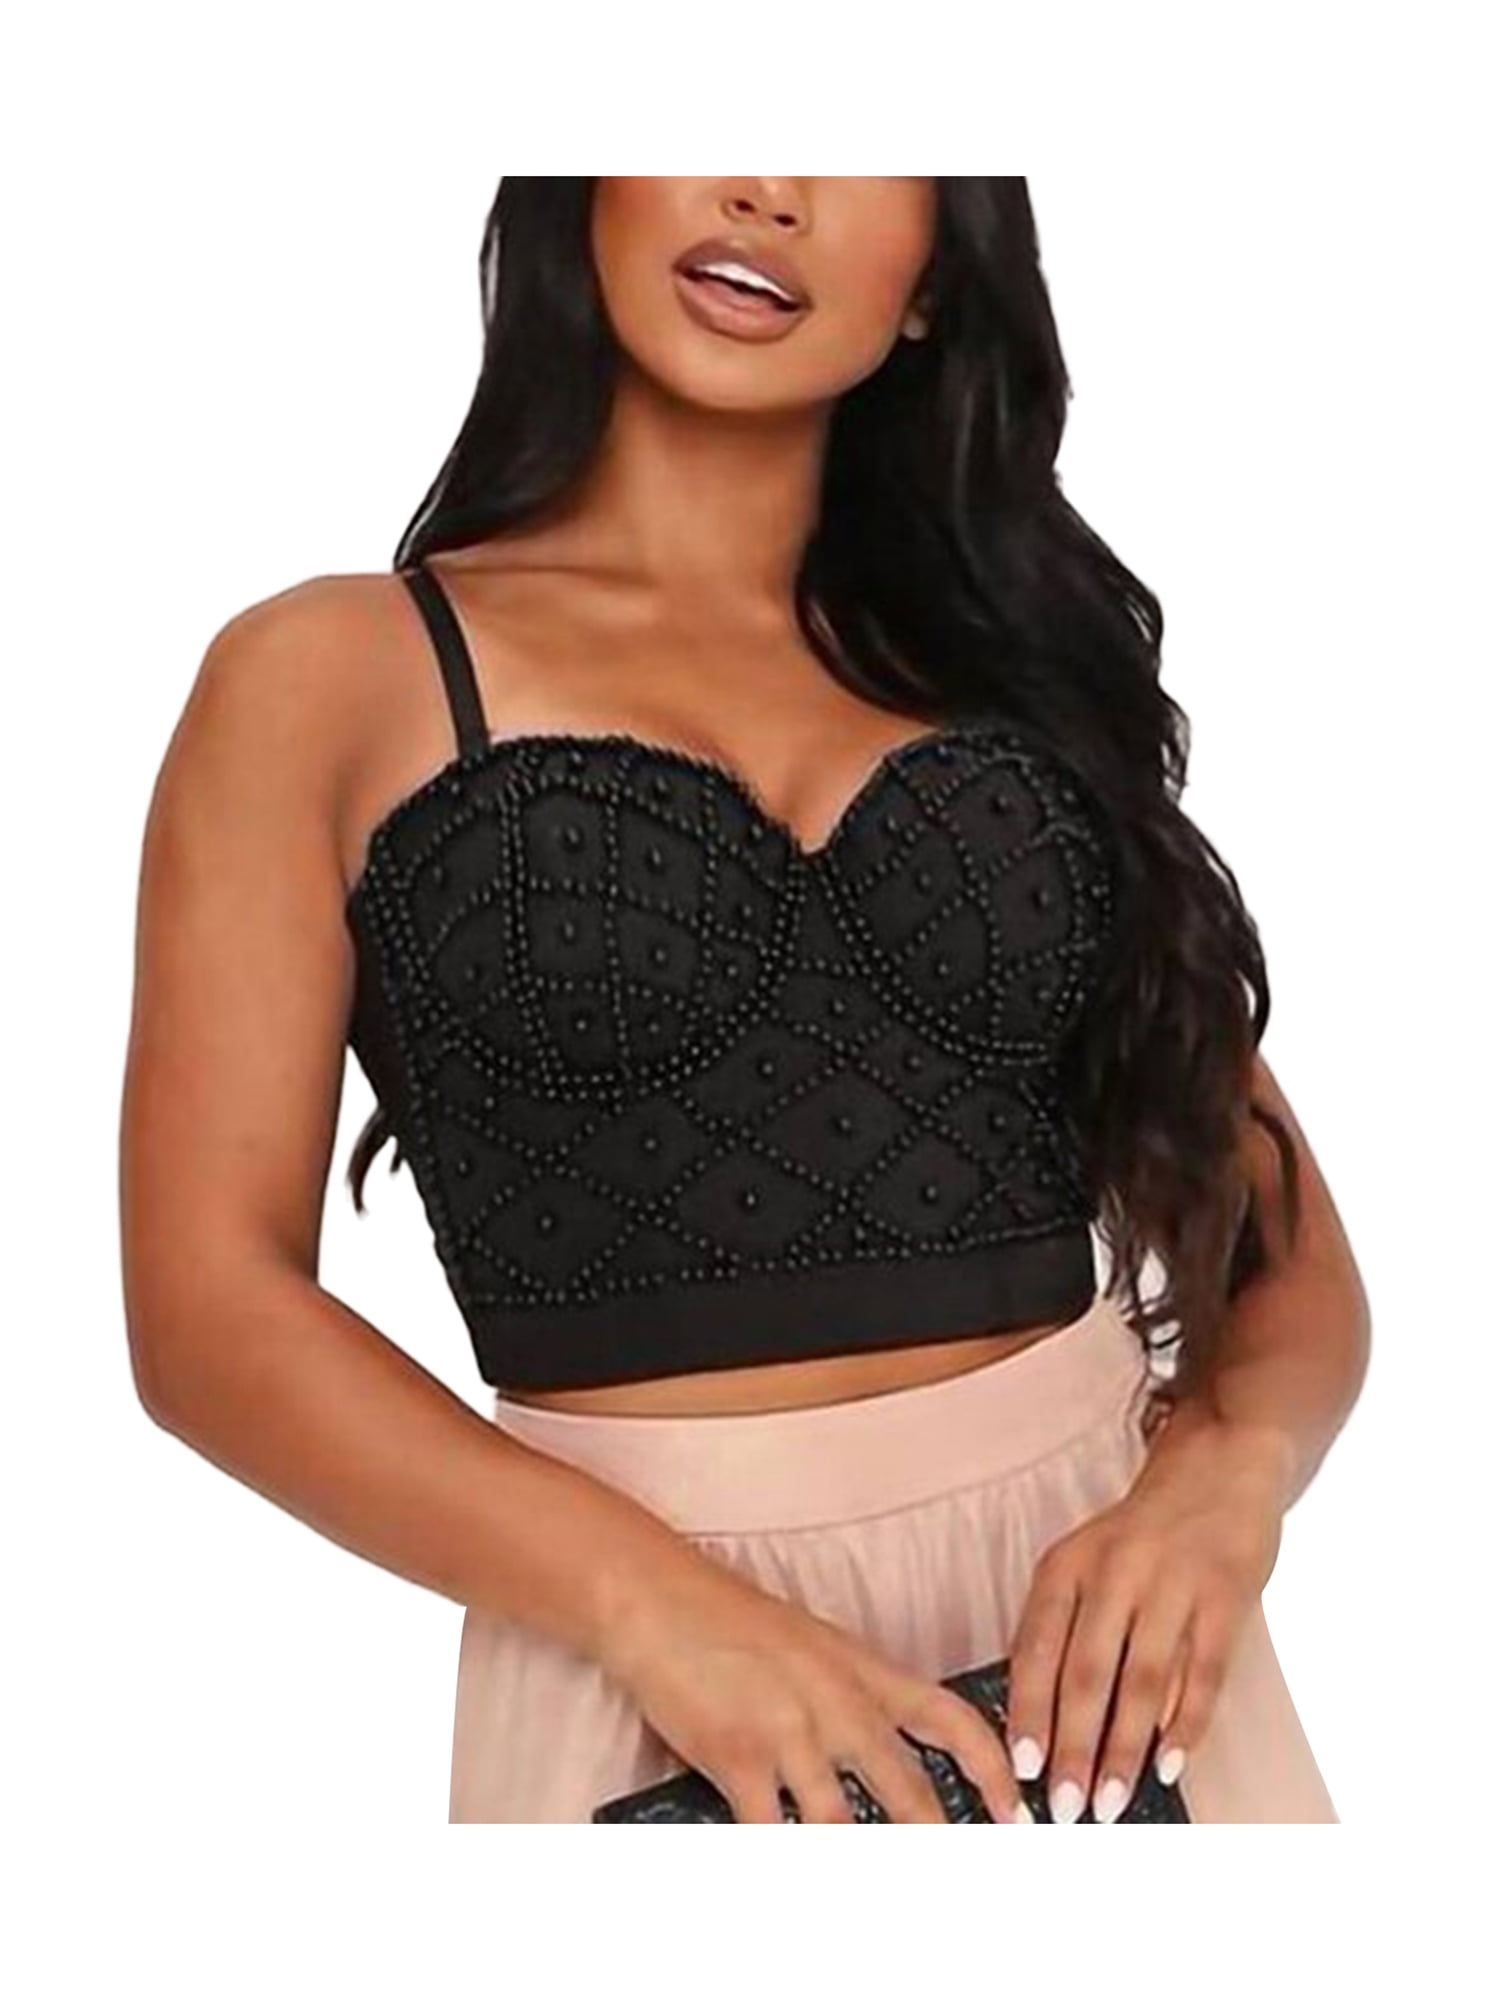 Intimates & Sleepwear  Black Lace Corset Bustier Topdetachable